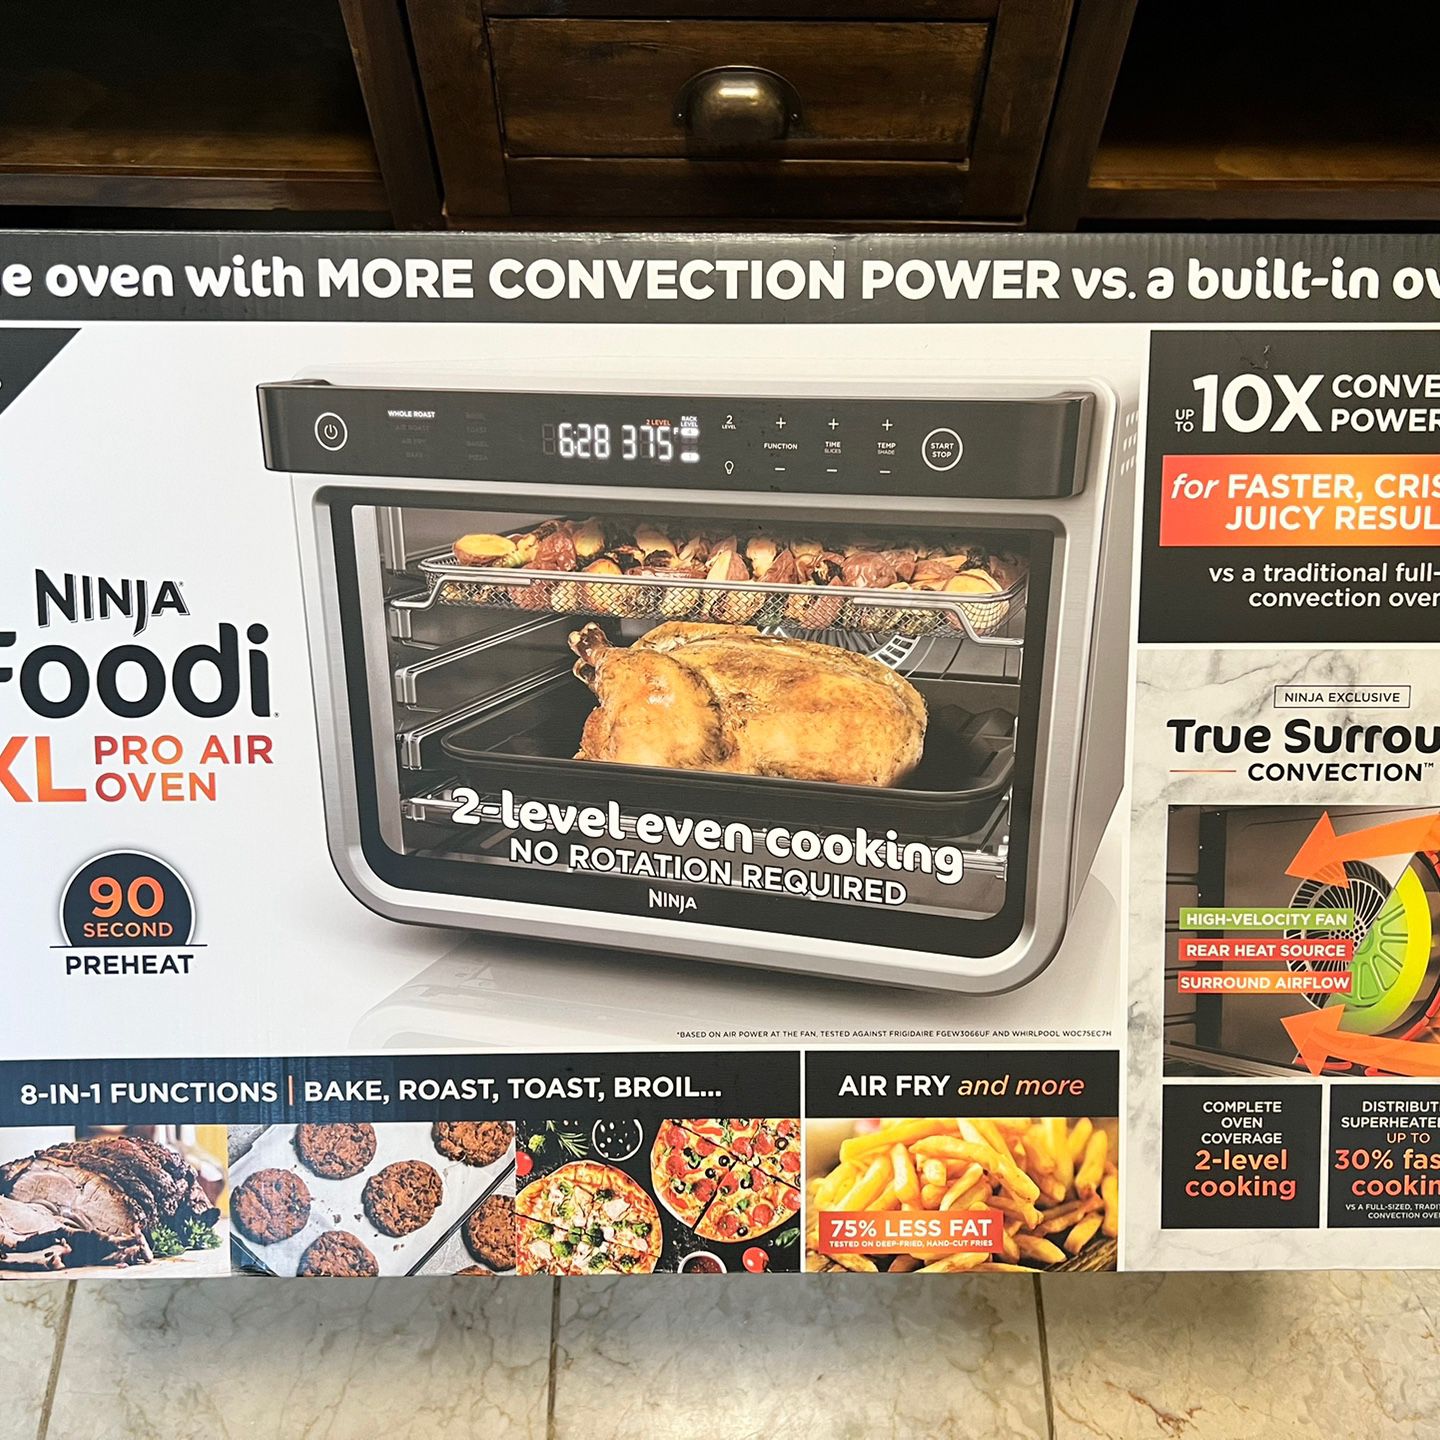 Brand NEW Ninja Foodi XL Pro Air Oven DT200 for Sale in Poughkeepsie, NY -  OfferUp